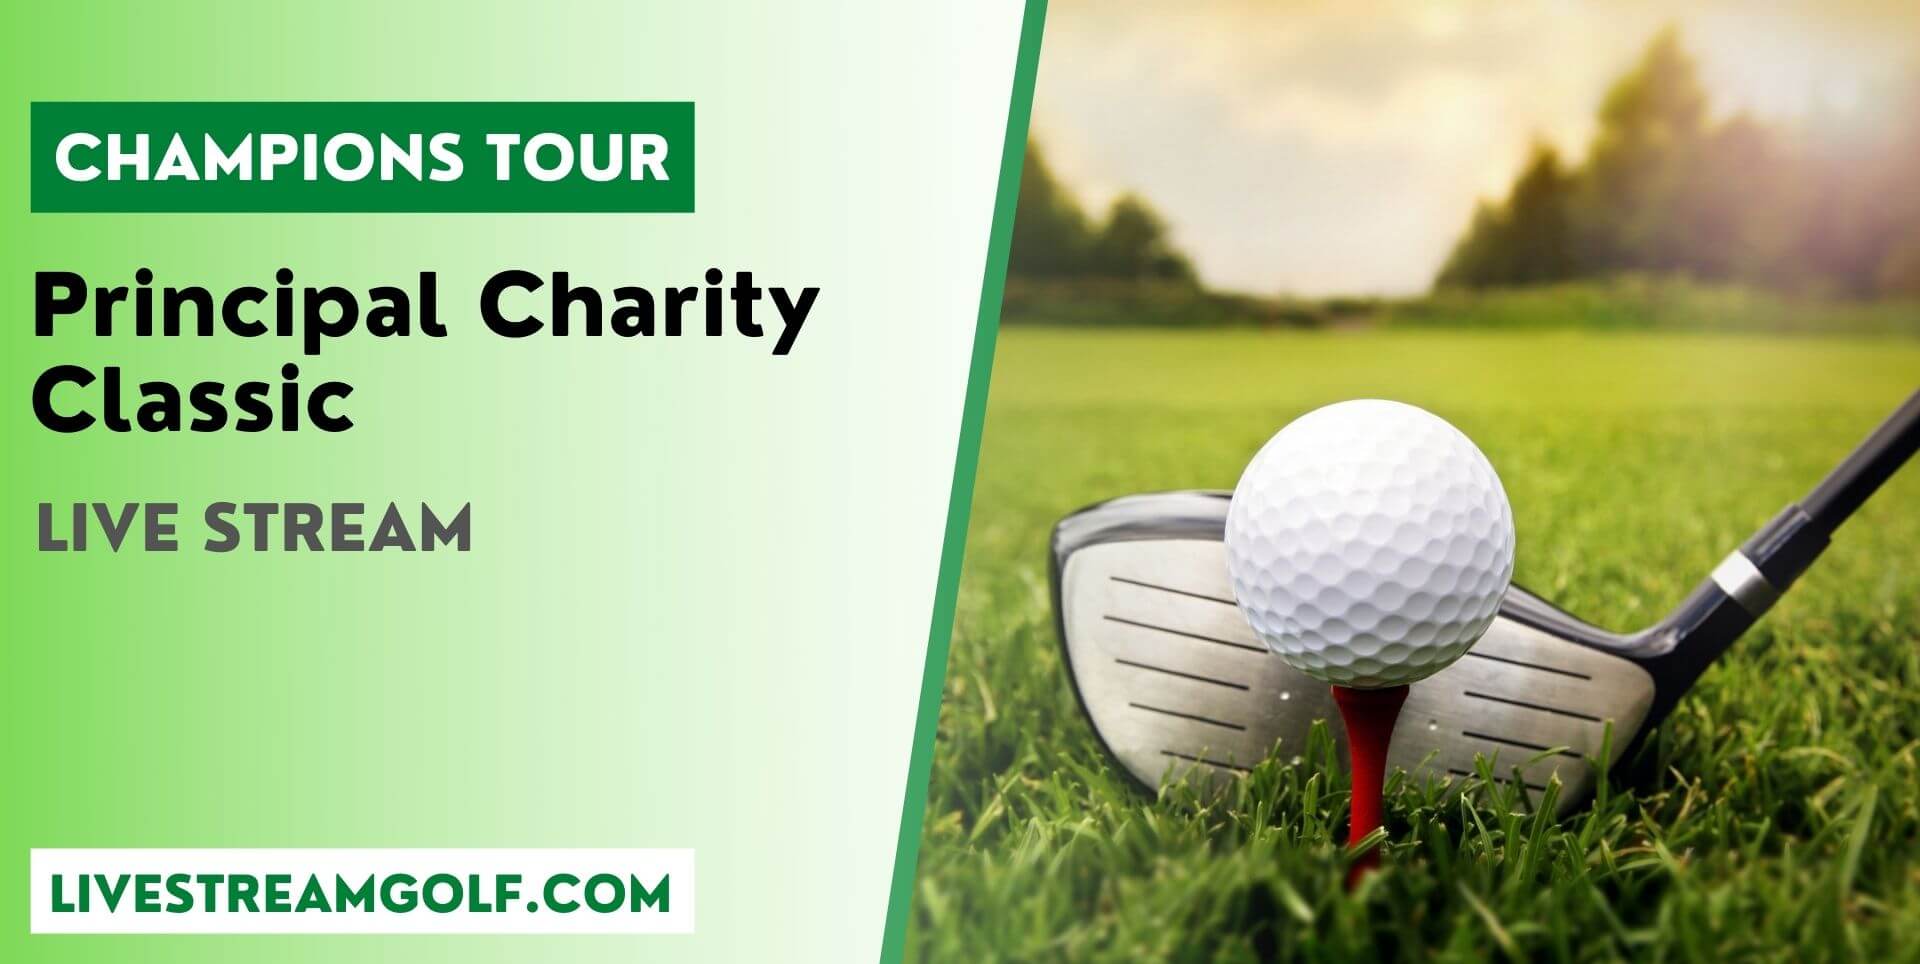 principal-charity-classic-live-streaming-champions-tour